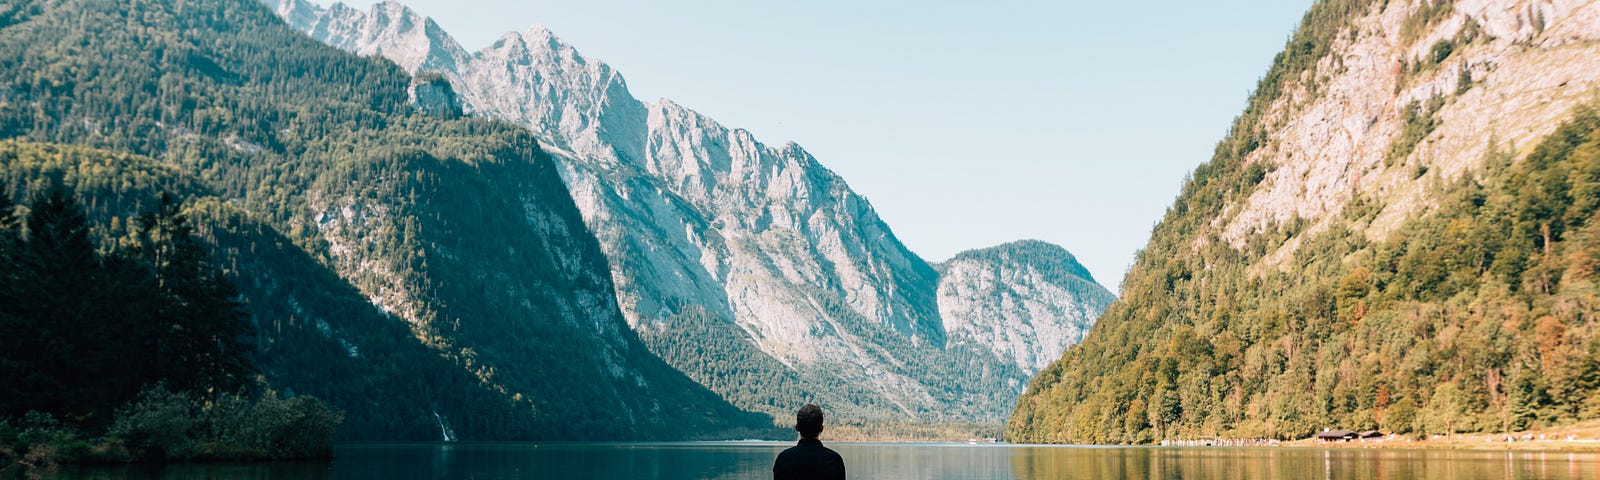 person sitting on a dock overlooking the lake and mountains